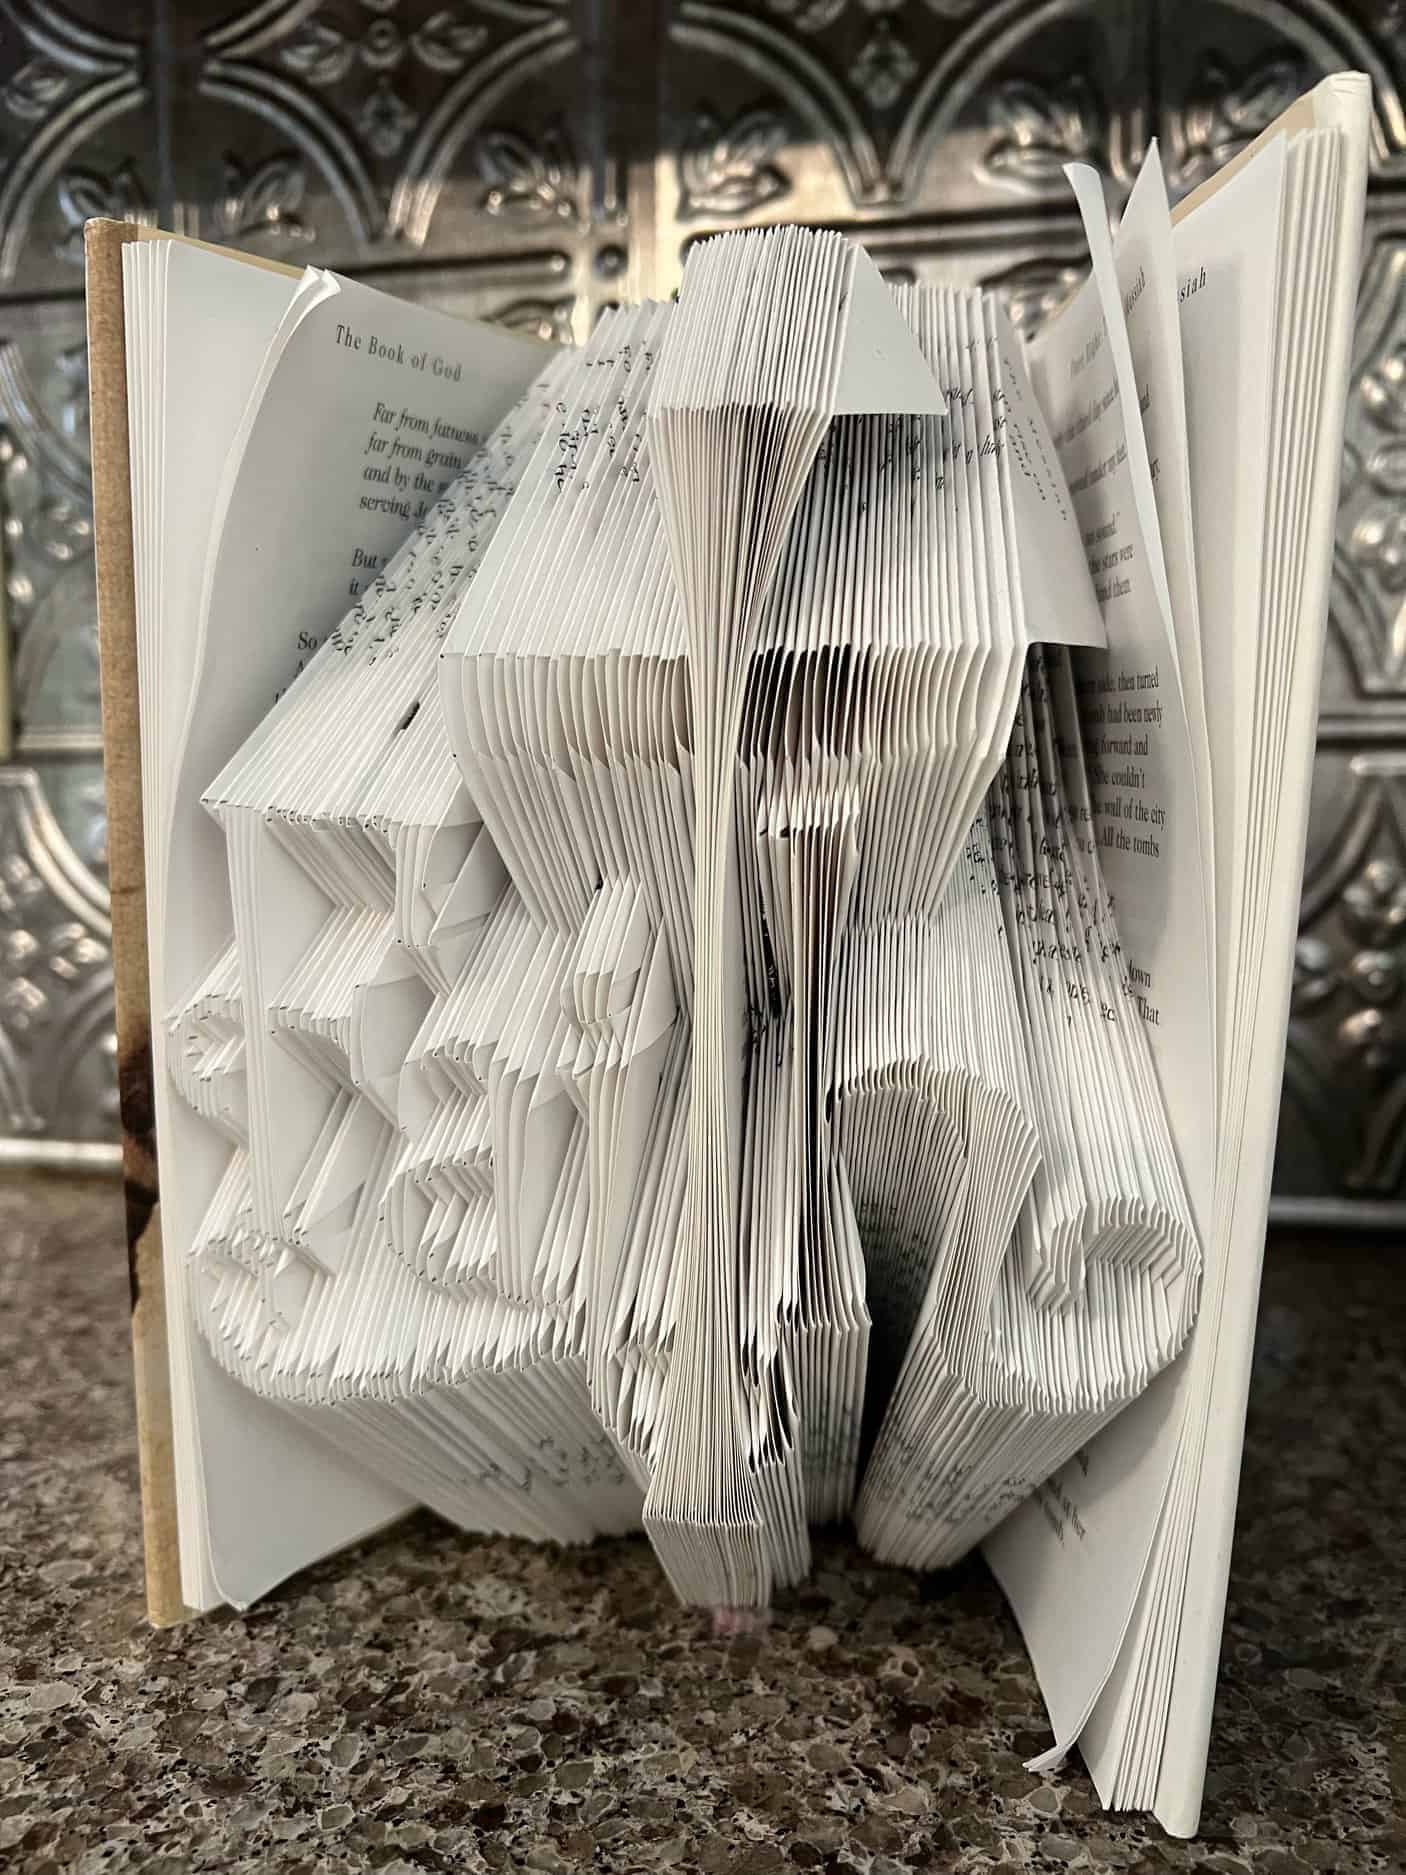 This Customized Folded Book is made with love by Victoria J. Hyla (Author)/Victorious Editing Services! Shop more unique gift ideas today with Spots Initiatives, the best way to support creators.